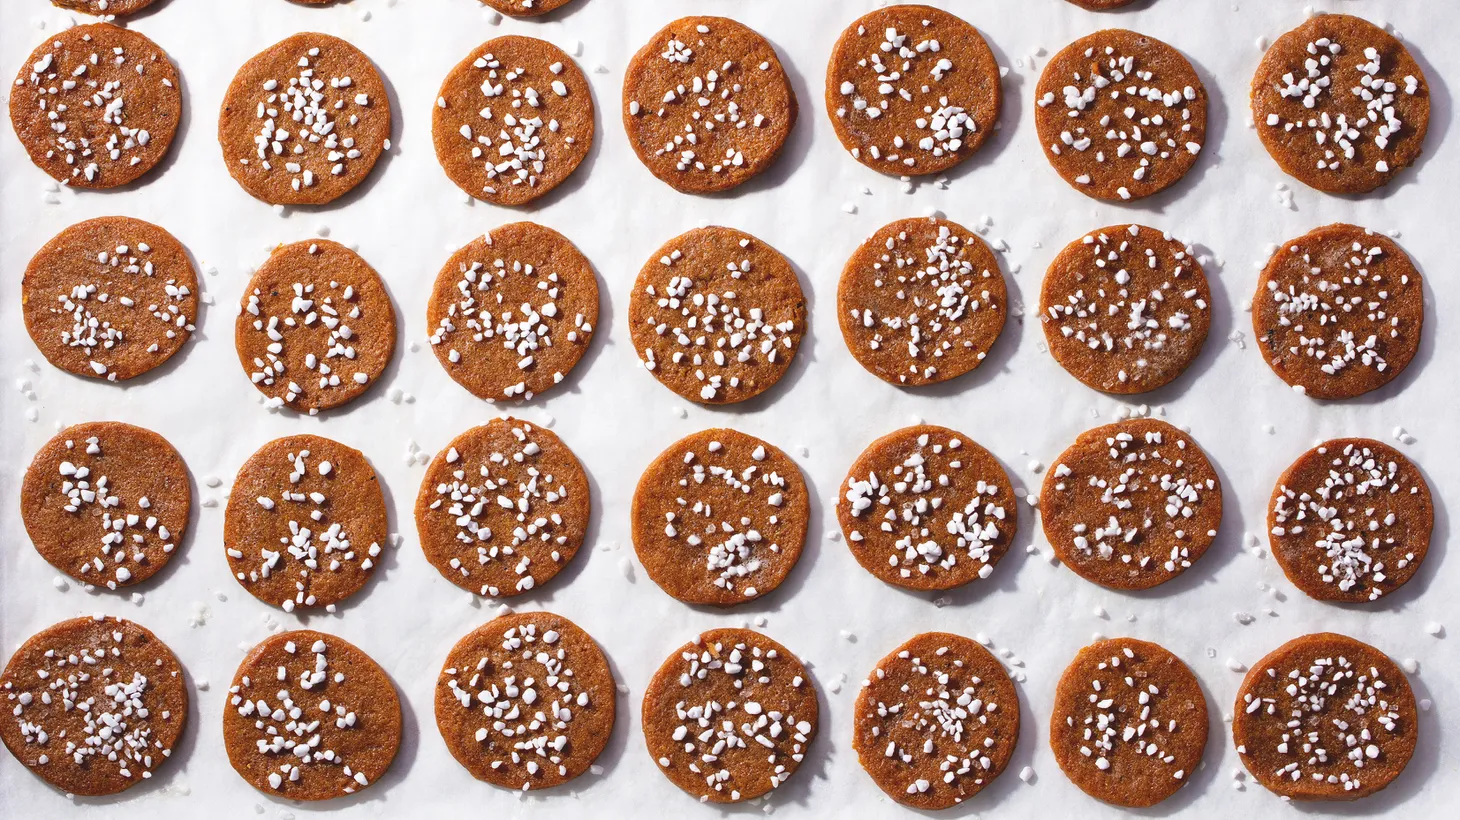 Scandinavian pepparkakor cookies contain black pepper and cayenne, and ride the cusp of sweet and savory. Rose Levy Beranbaum suggests using them as an hors d’oeuvre when spread with a soft goat cheese.